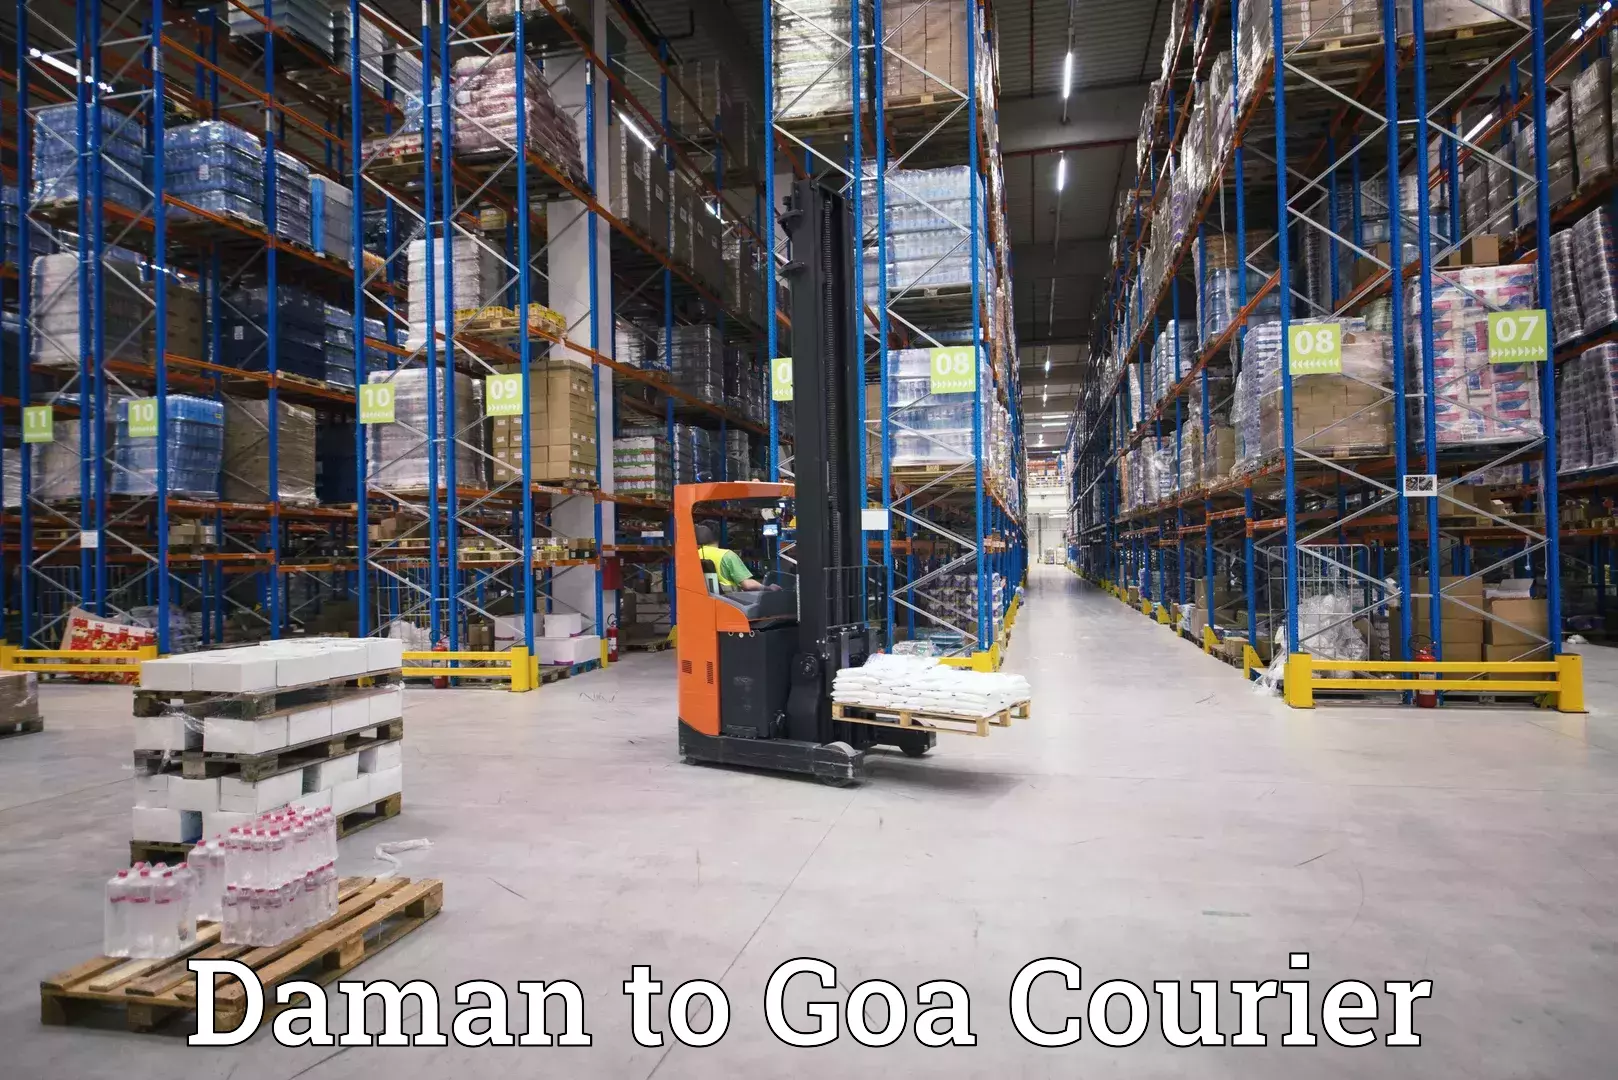 Express mail solutions Daman to Goa